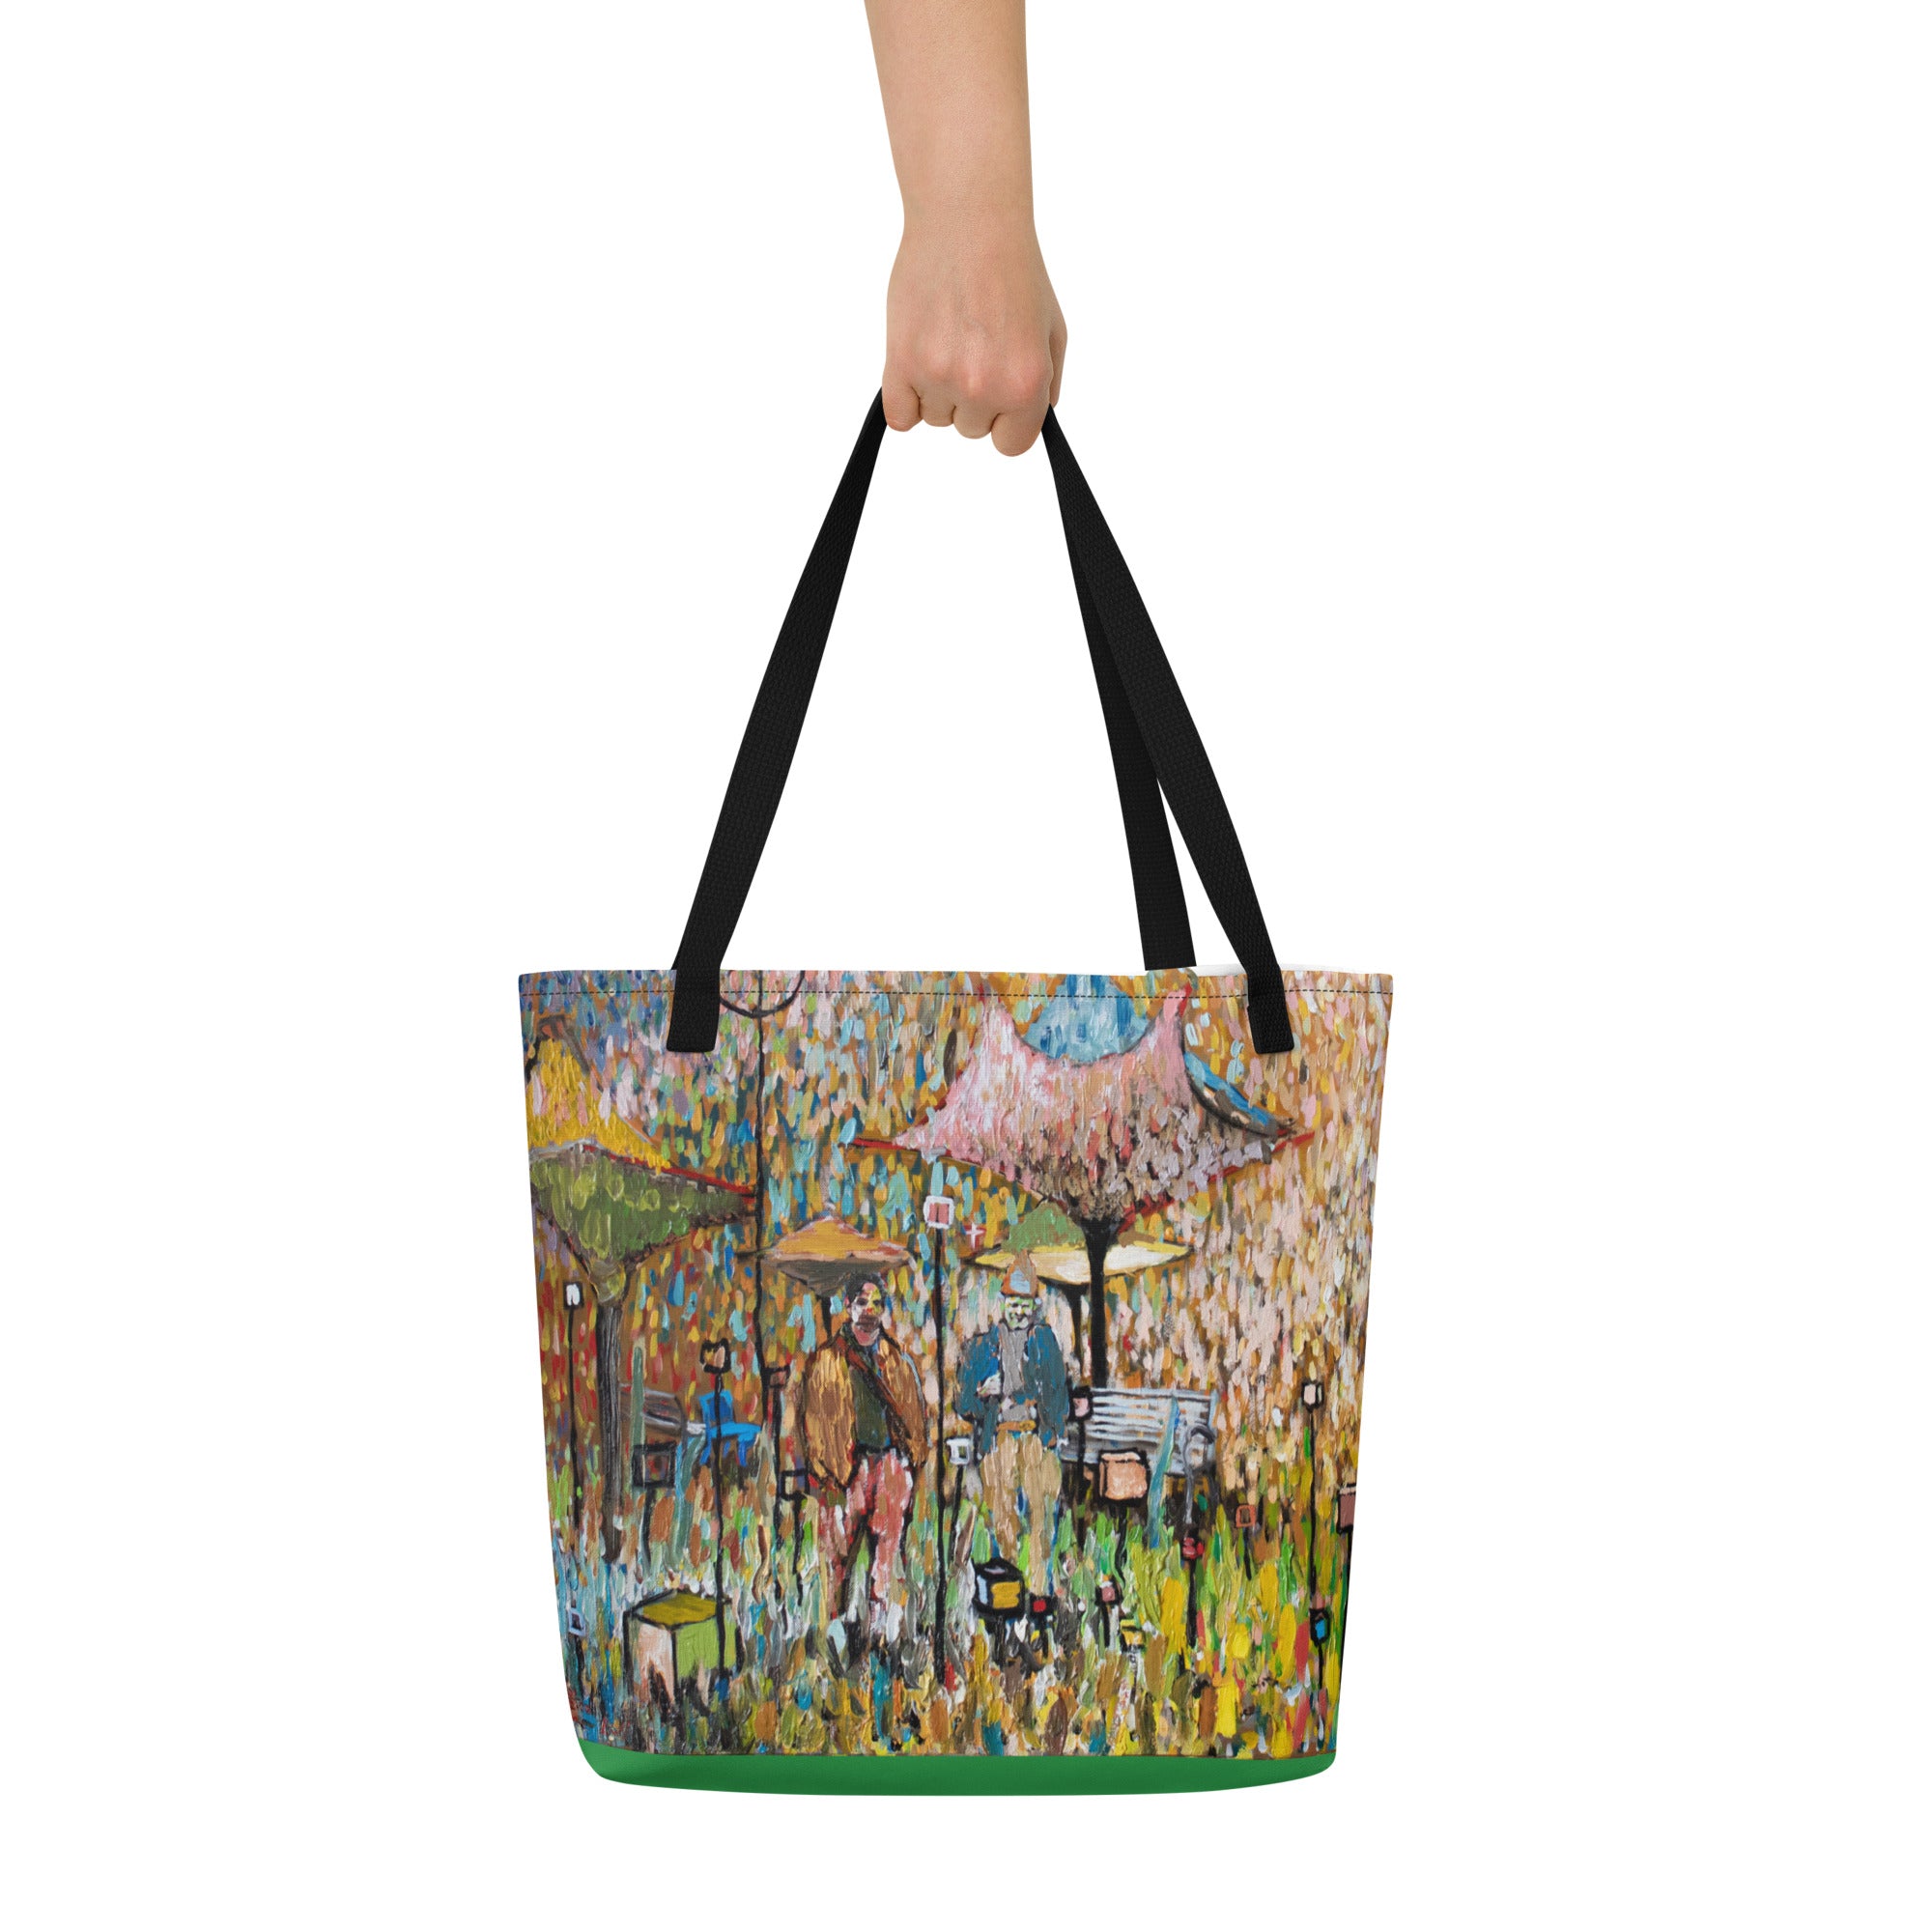 Exchange Place [tote bag]